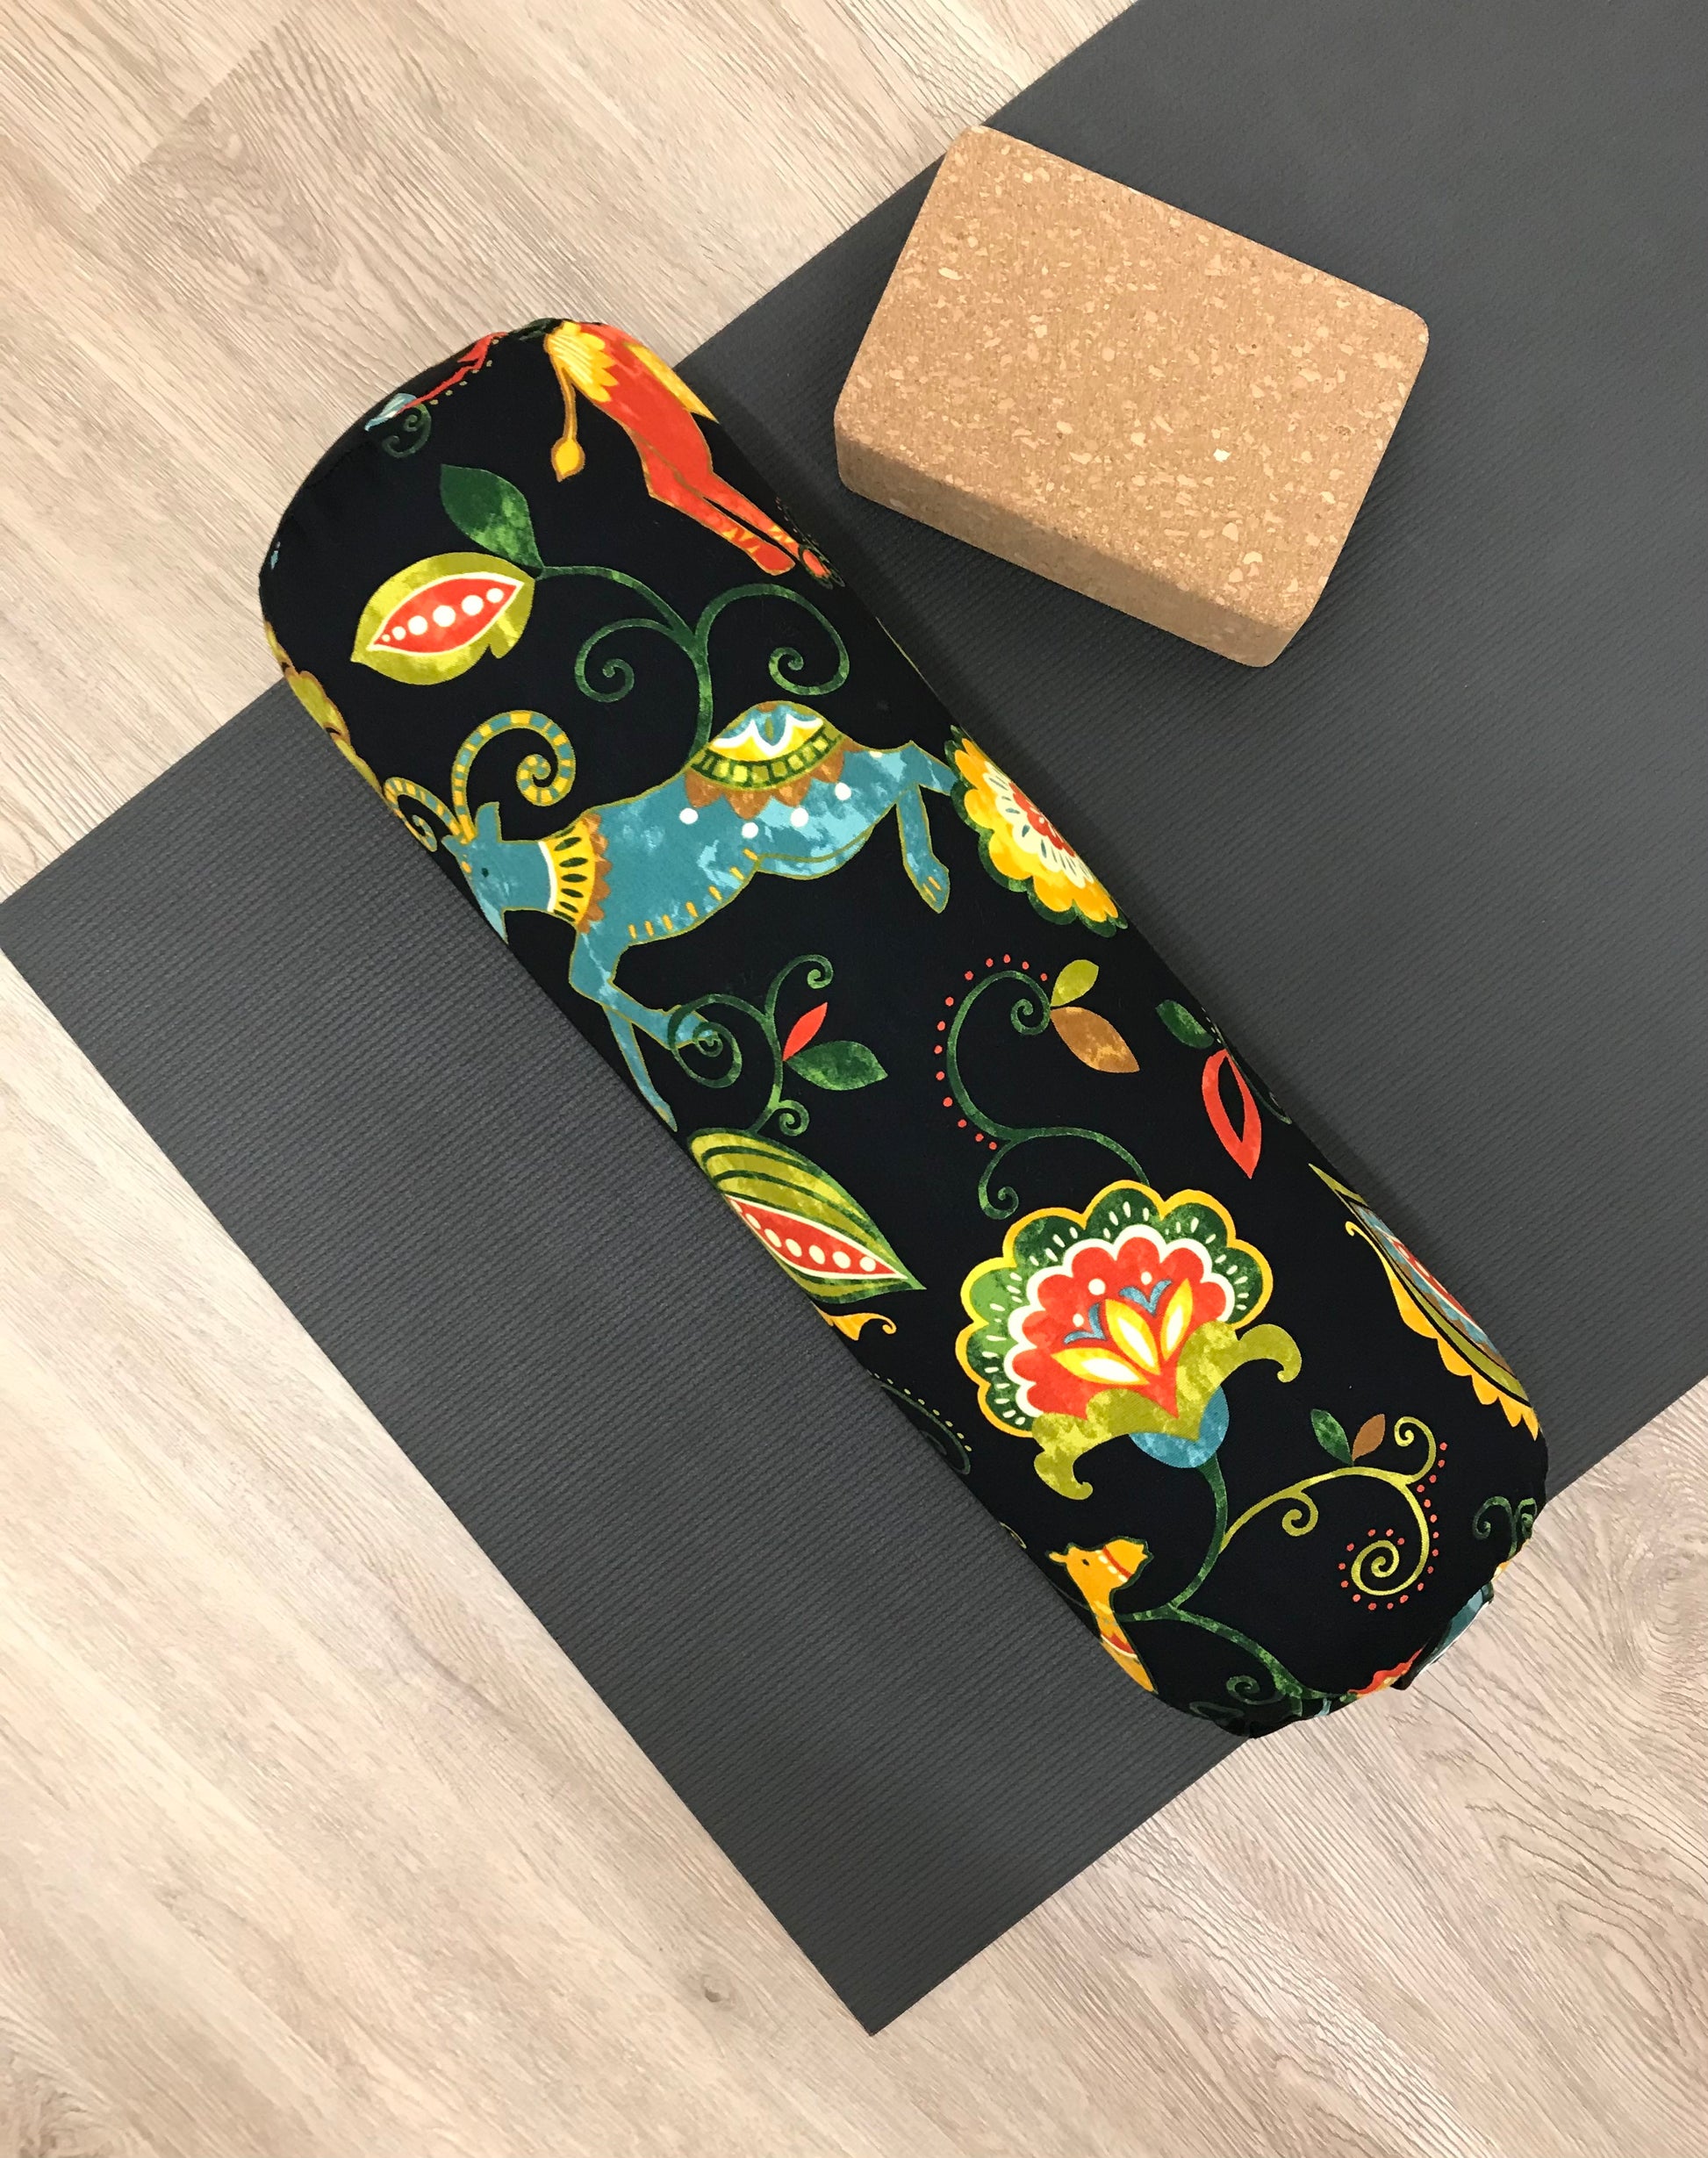 Round yoga bolster in durable cotton canvas, in black and bright colour novelty print fabric. Allergy conscious fill with removeable cover. Made in Canada by My Yoga Room Elements